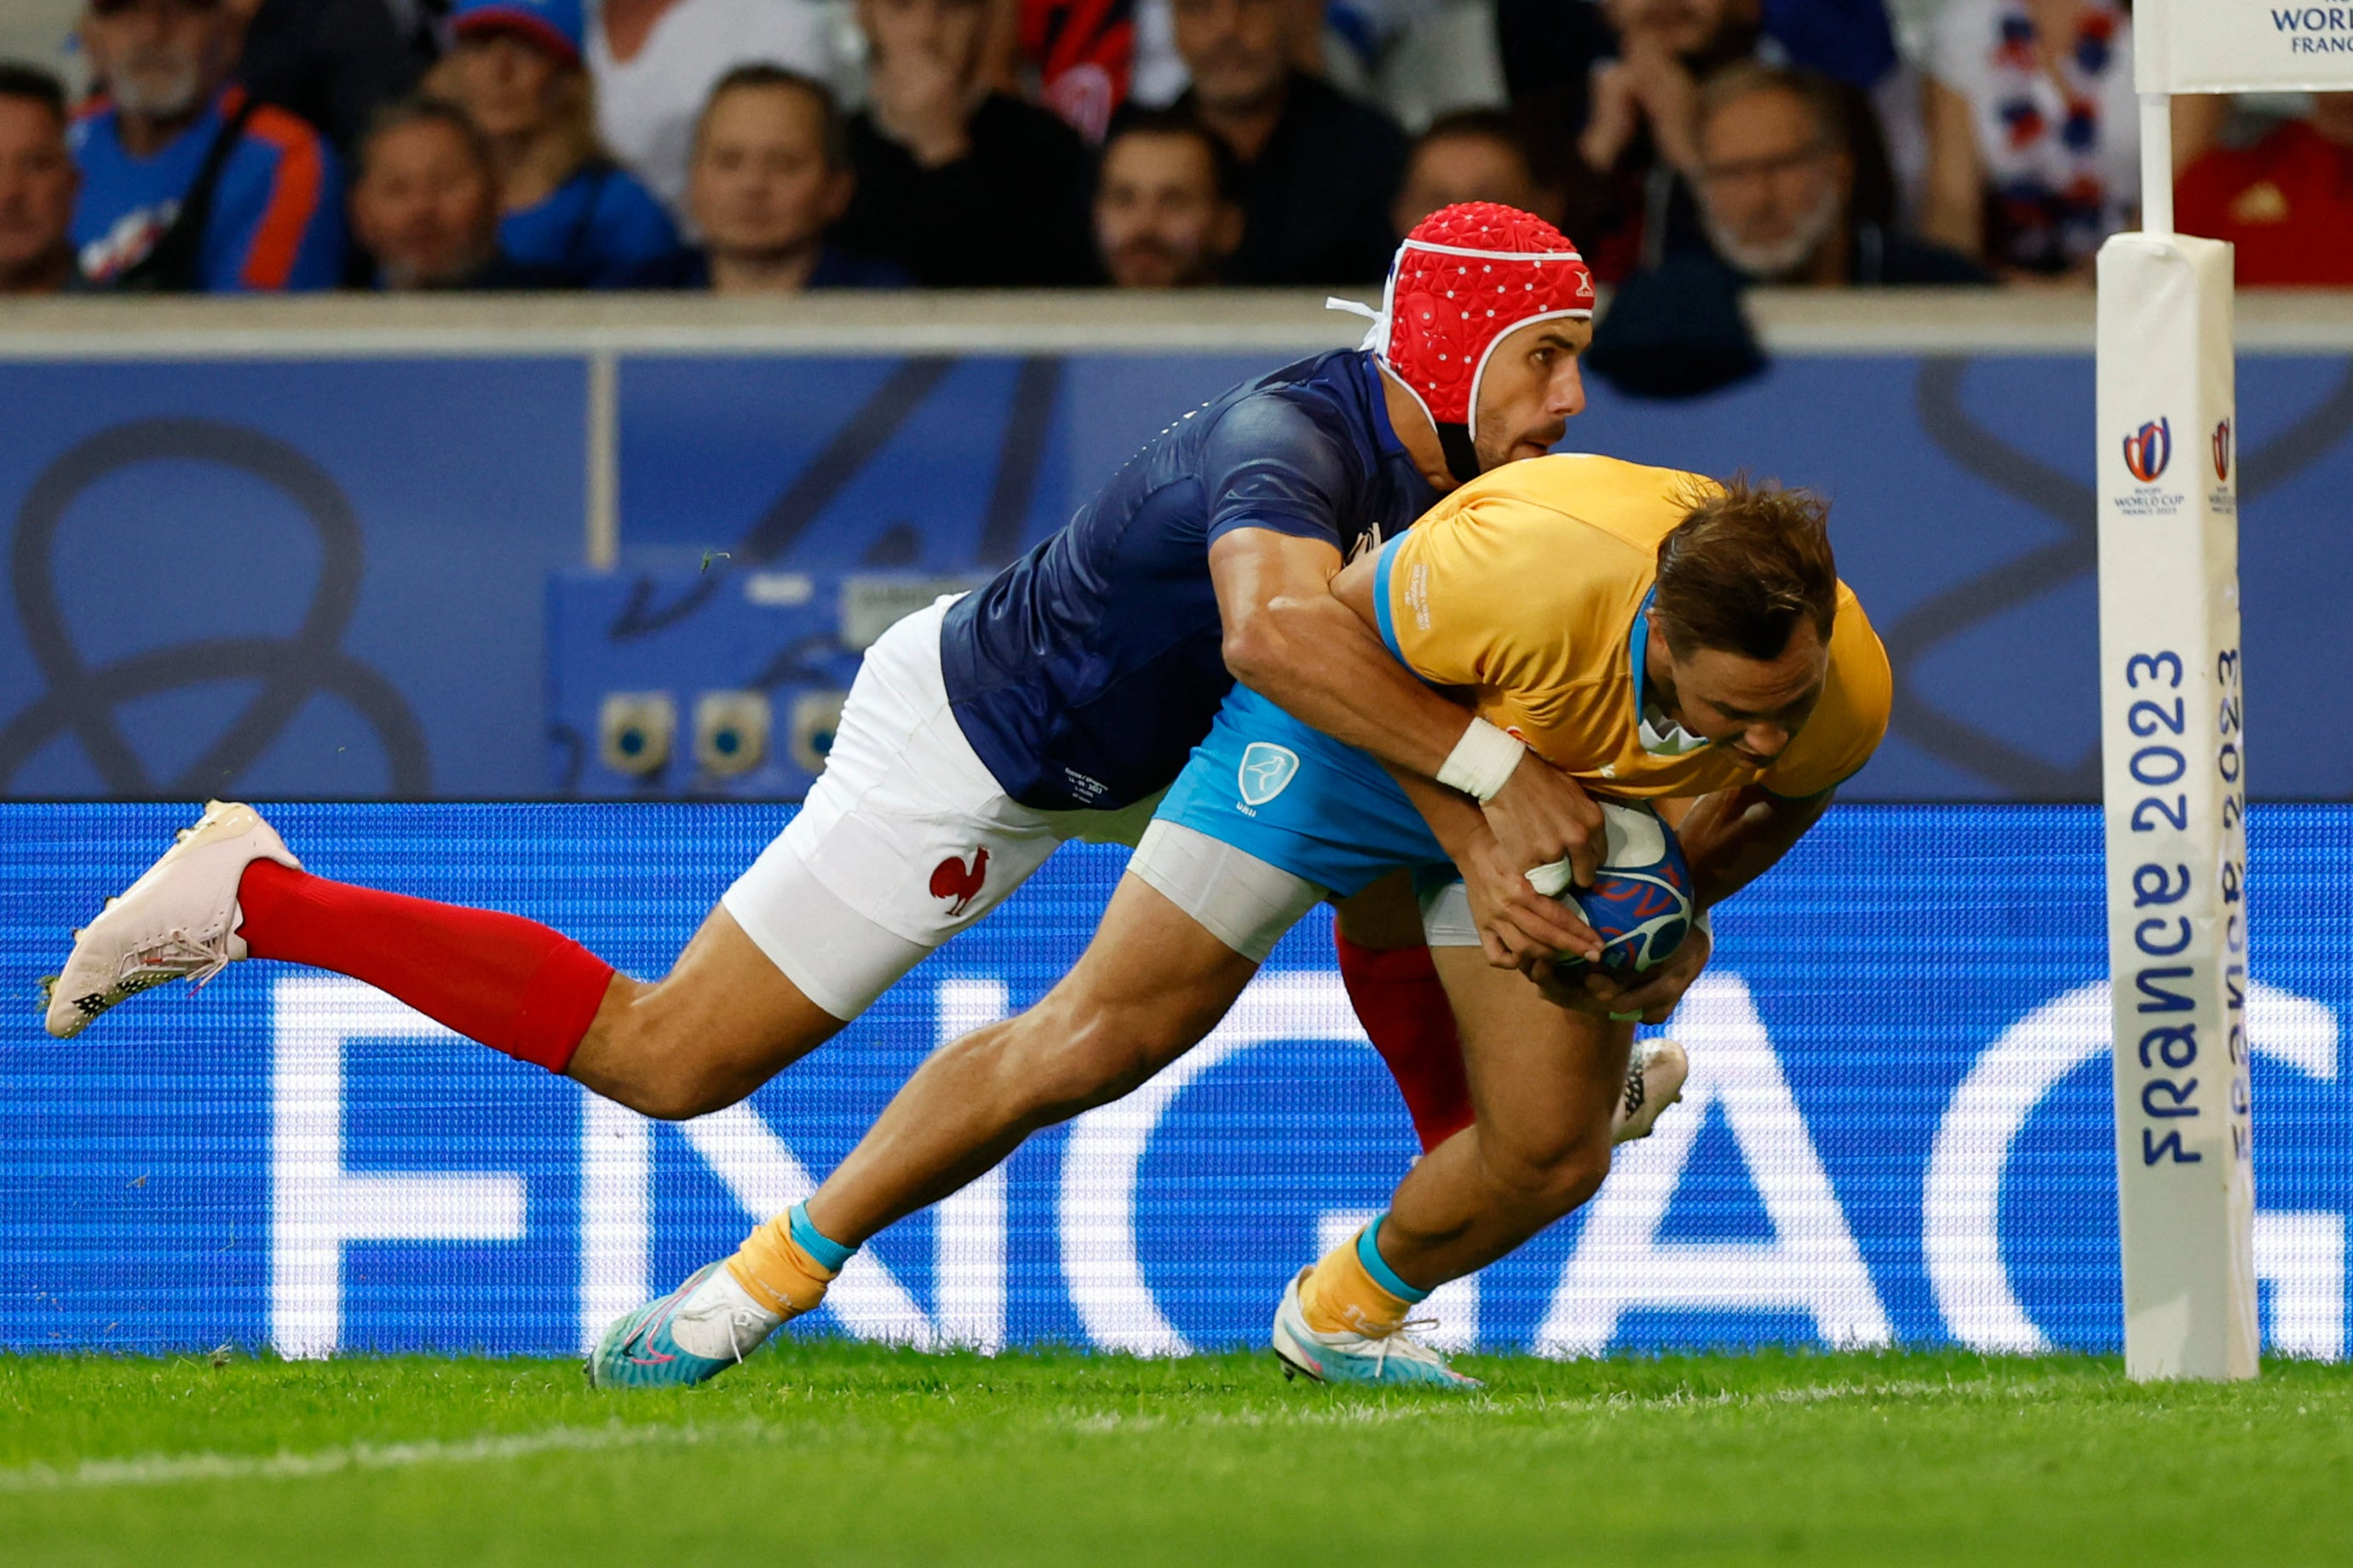 Nicolas Freitas’s early try gave France a huge scare